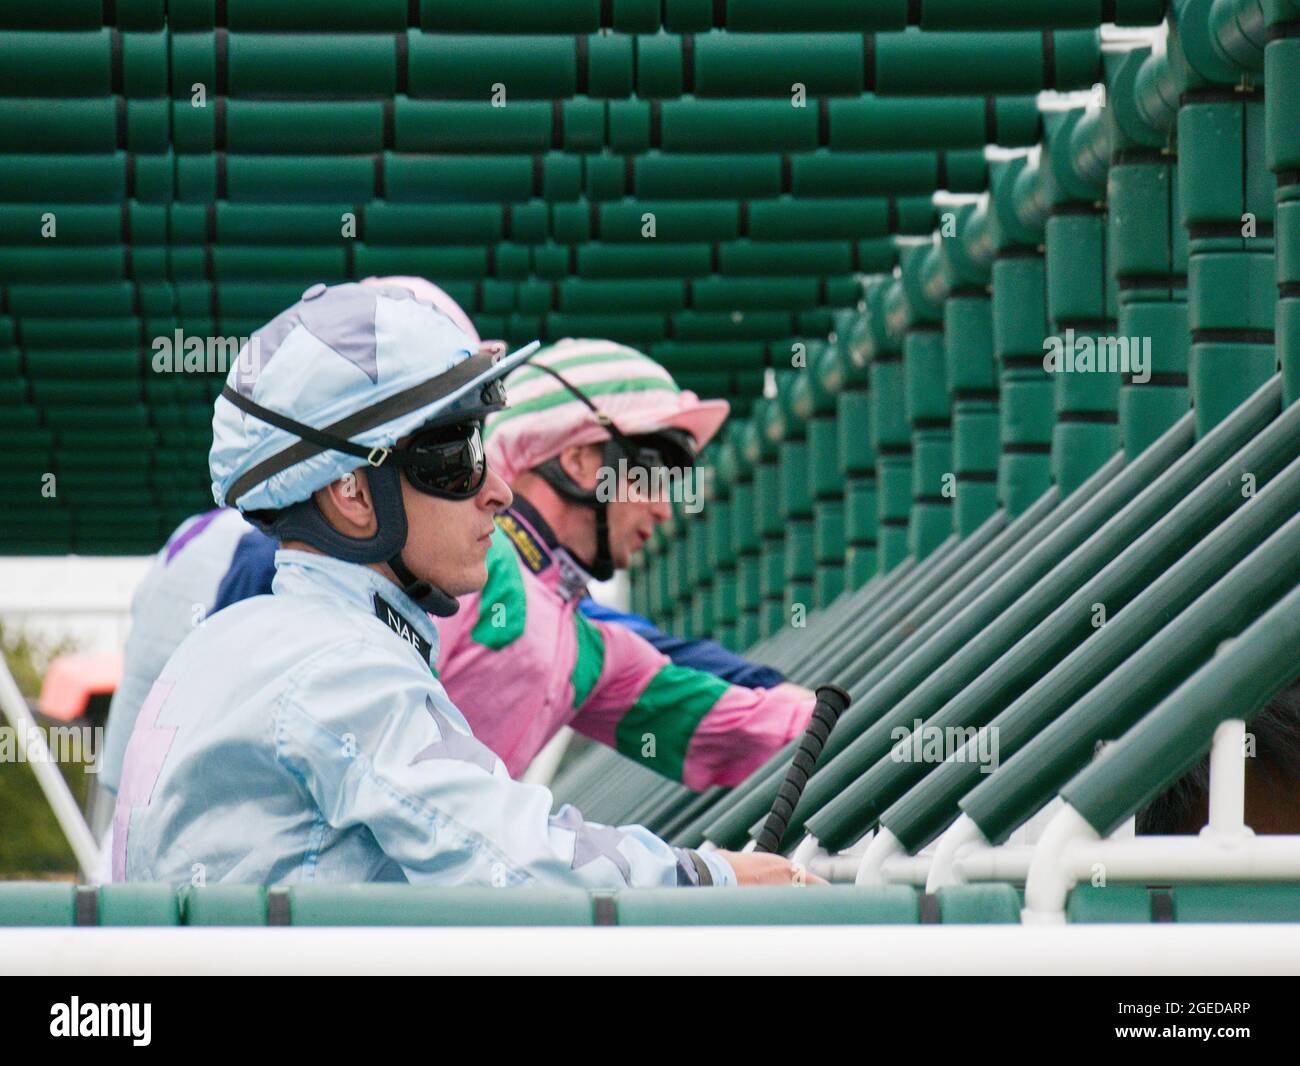 Jockeys Richard Kingscote and Jack Mitchell in the starting gate before a race at York Racecourse. Stock Photo